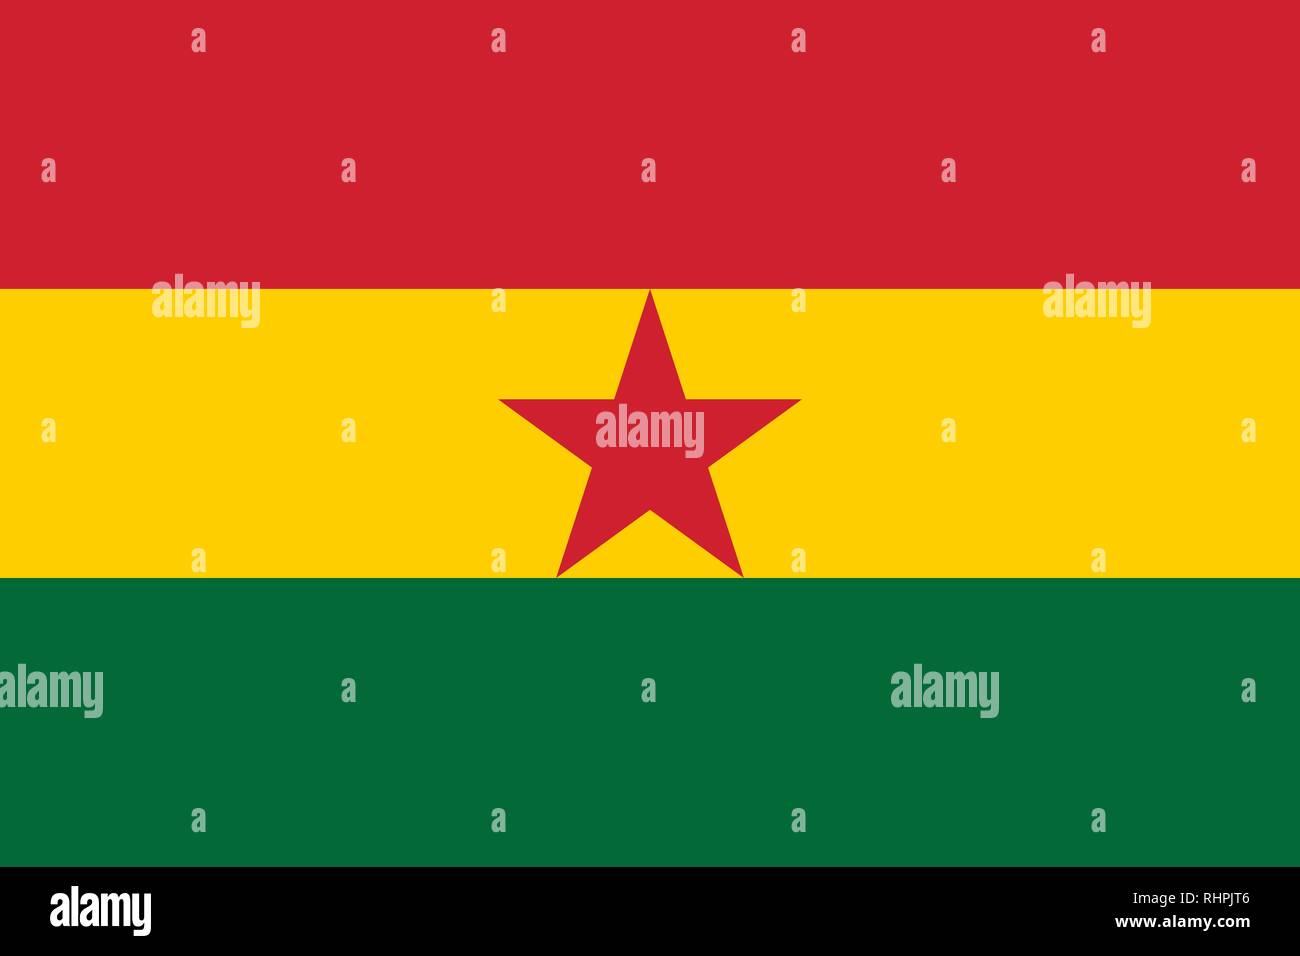 Vector Image of Ghana Flag. Based on the official and exact Ghana flag dimensions (3:2) & colors (186C, 116C, 349C and Black) Stock Vector